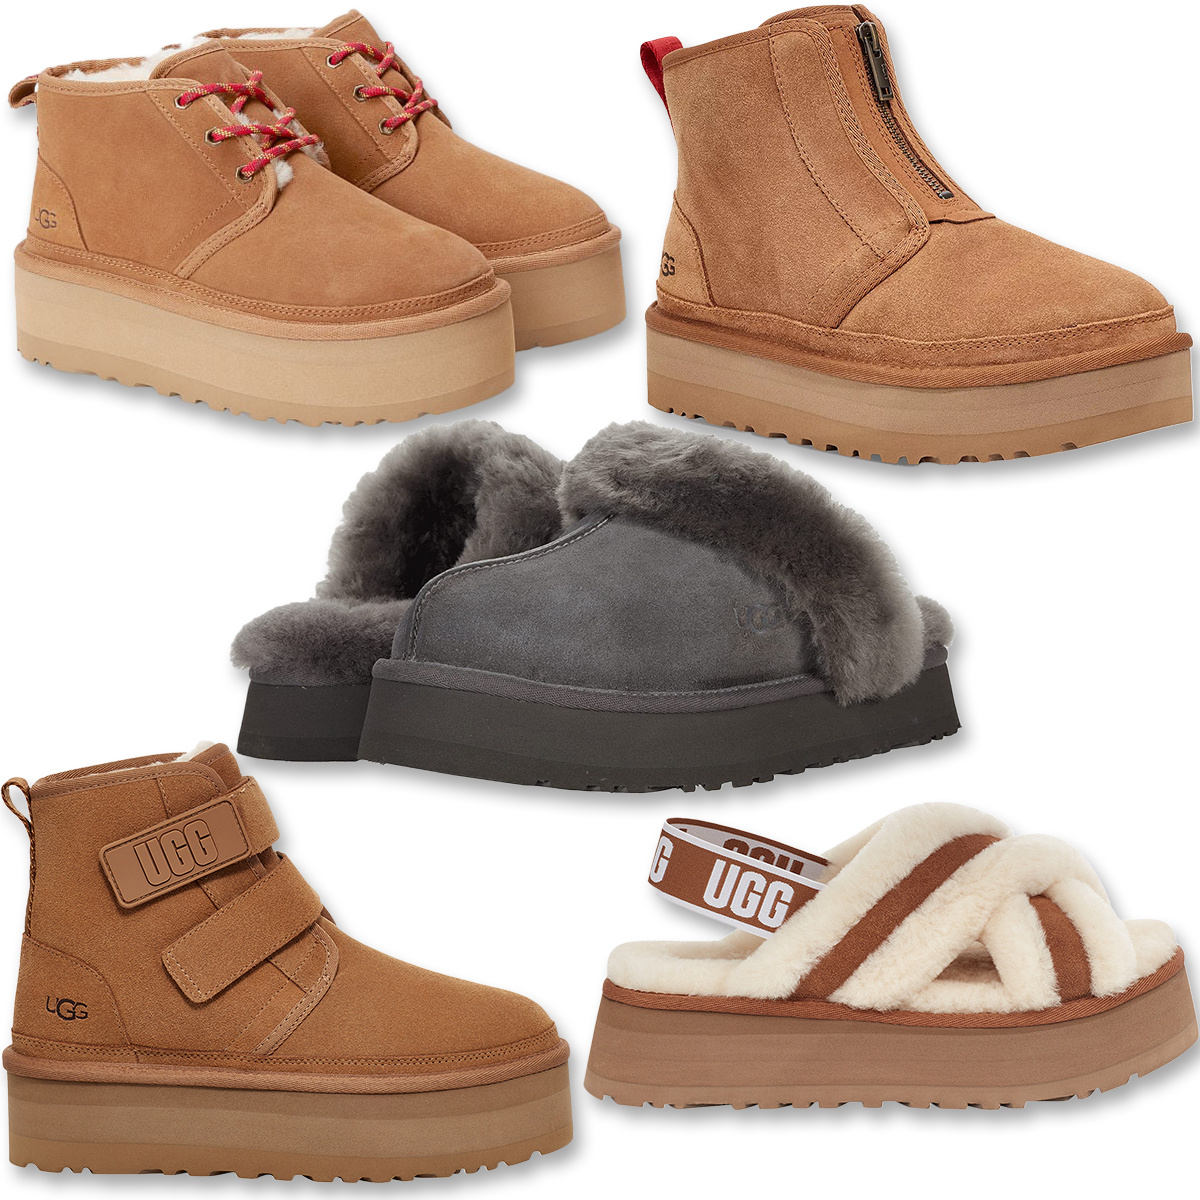 We Found All the Platform UGGs in Stock So You Don't Have To